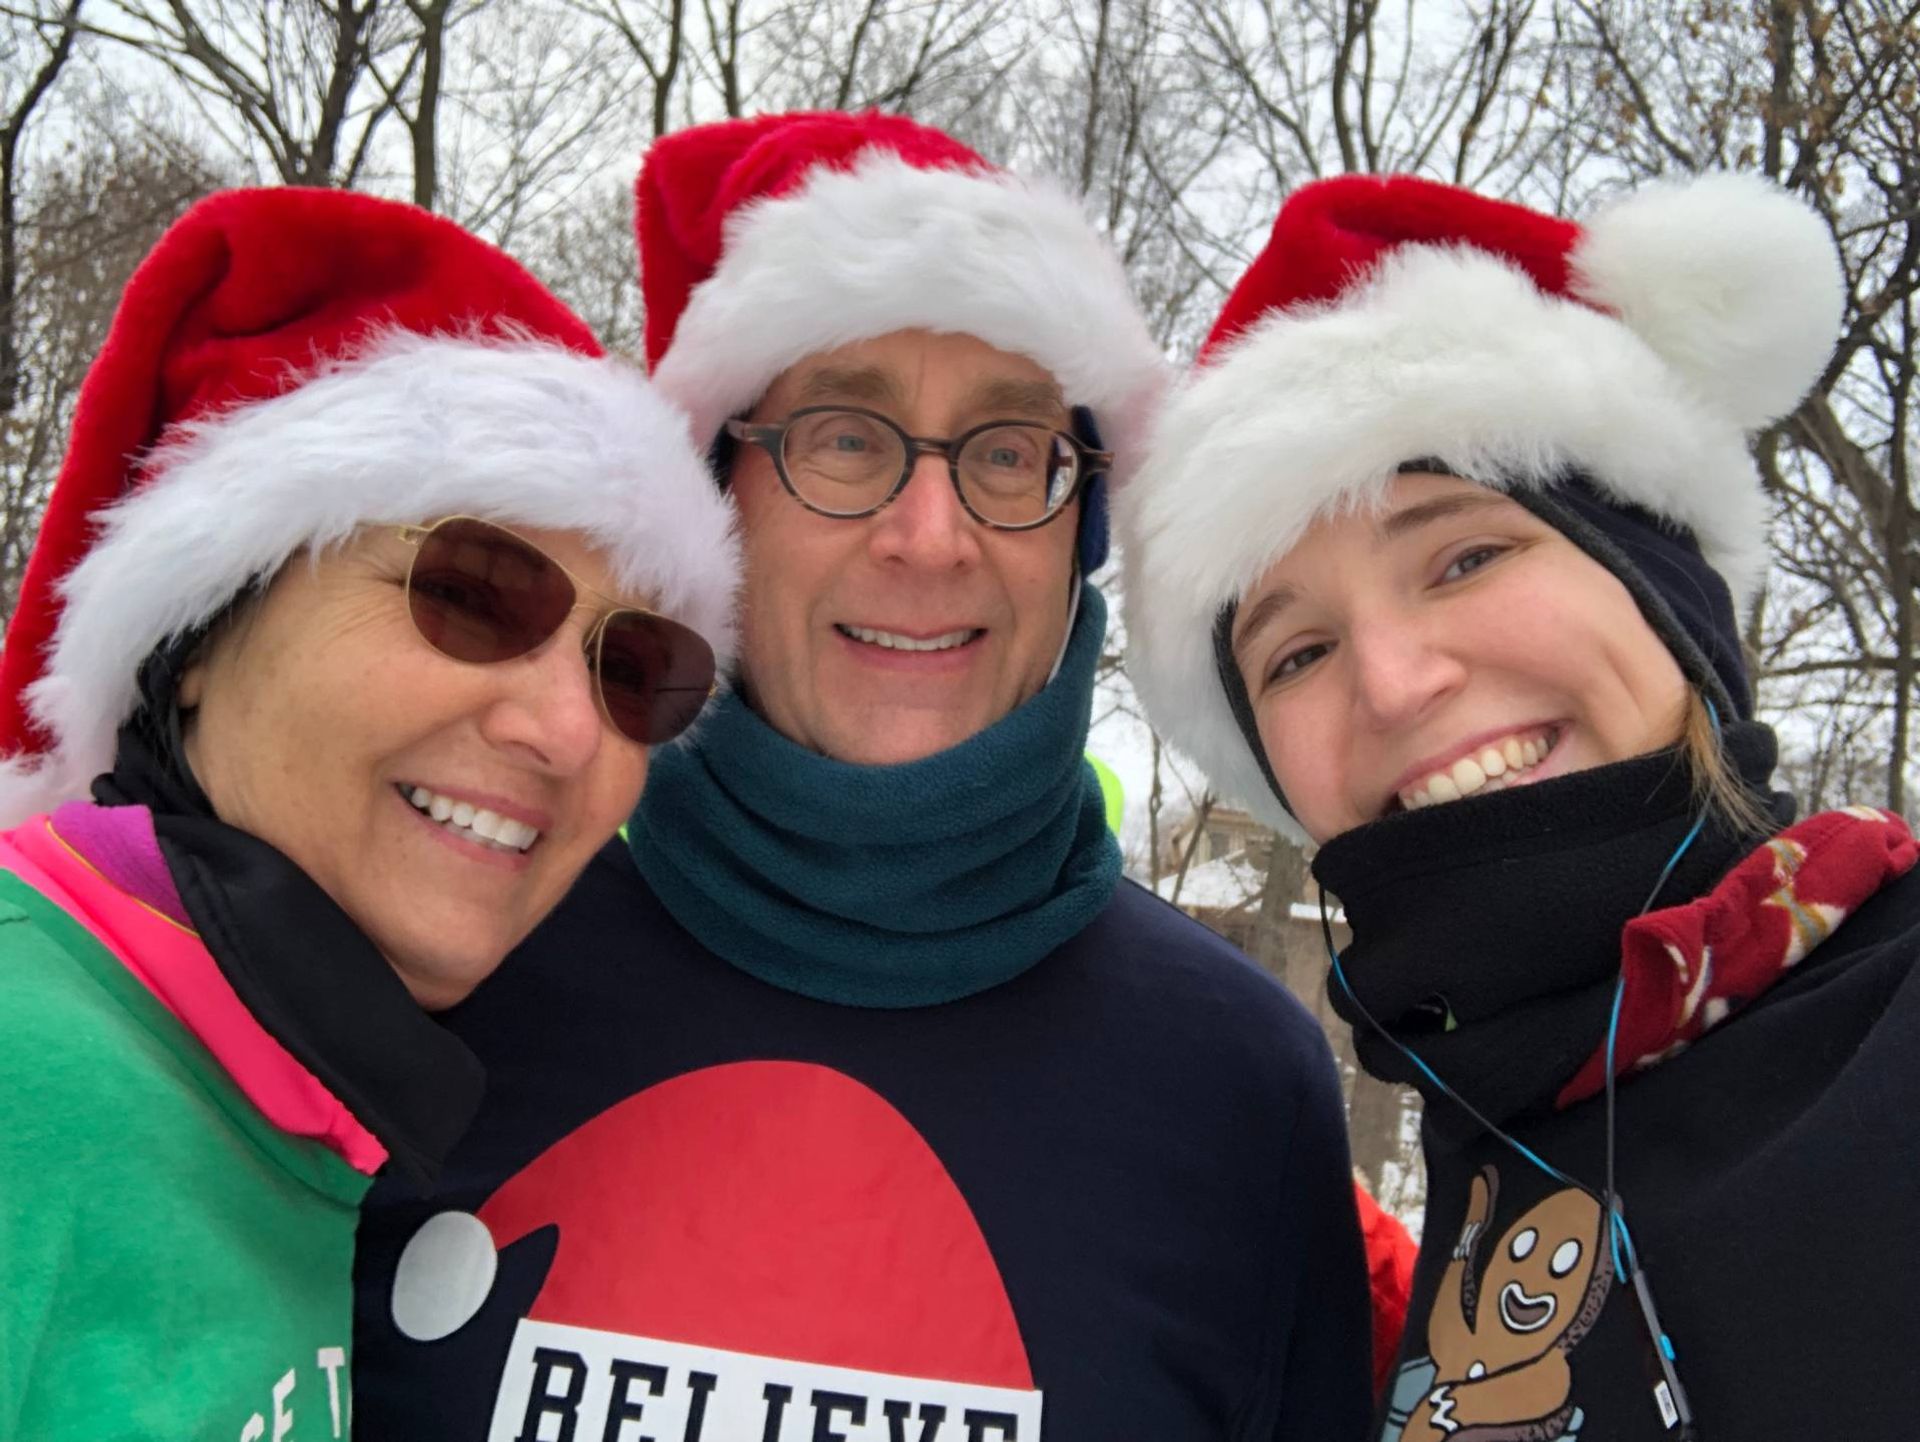 The author with her parents during a holiday-themed Reindeer Run. The weather outside may be frightful at times, but running can make it vaguely delightful - at least post-run.